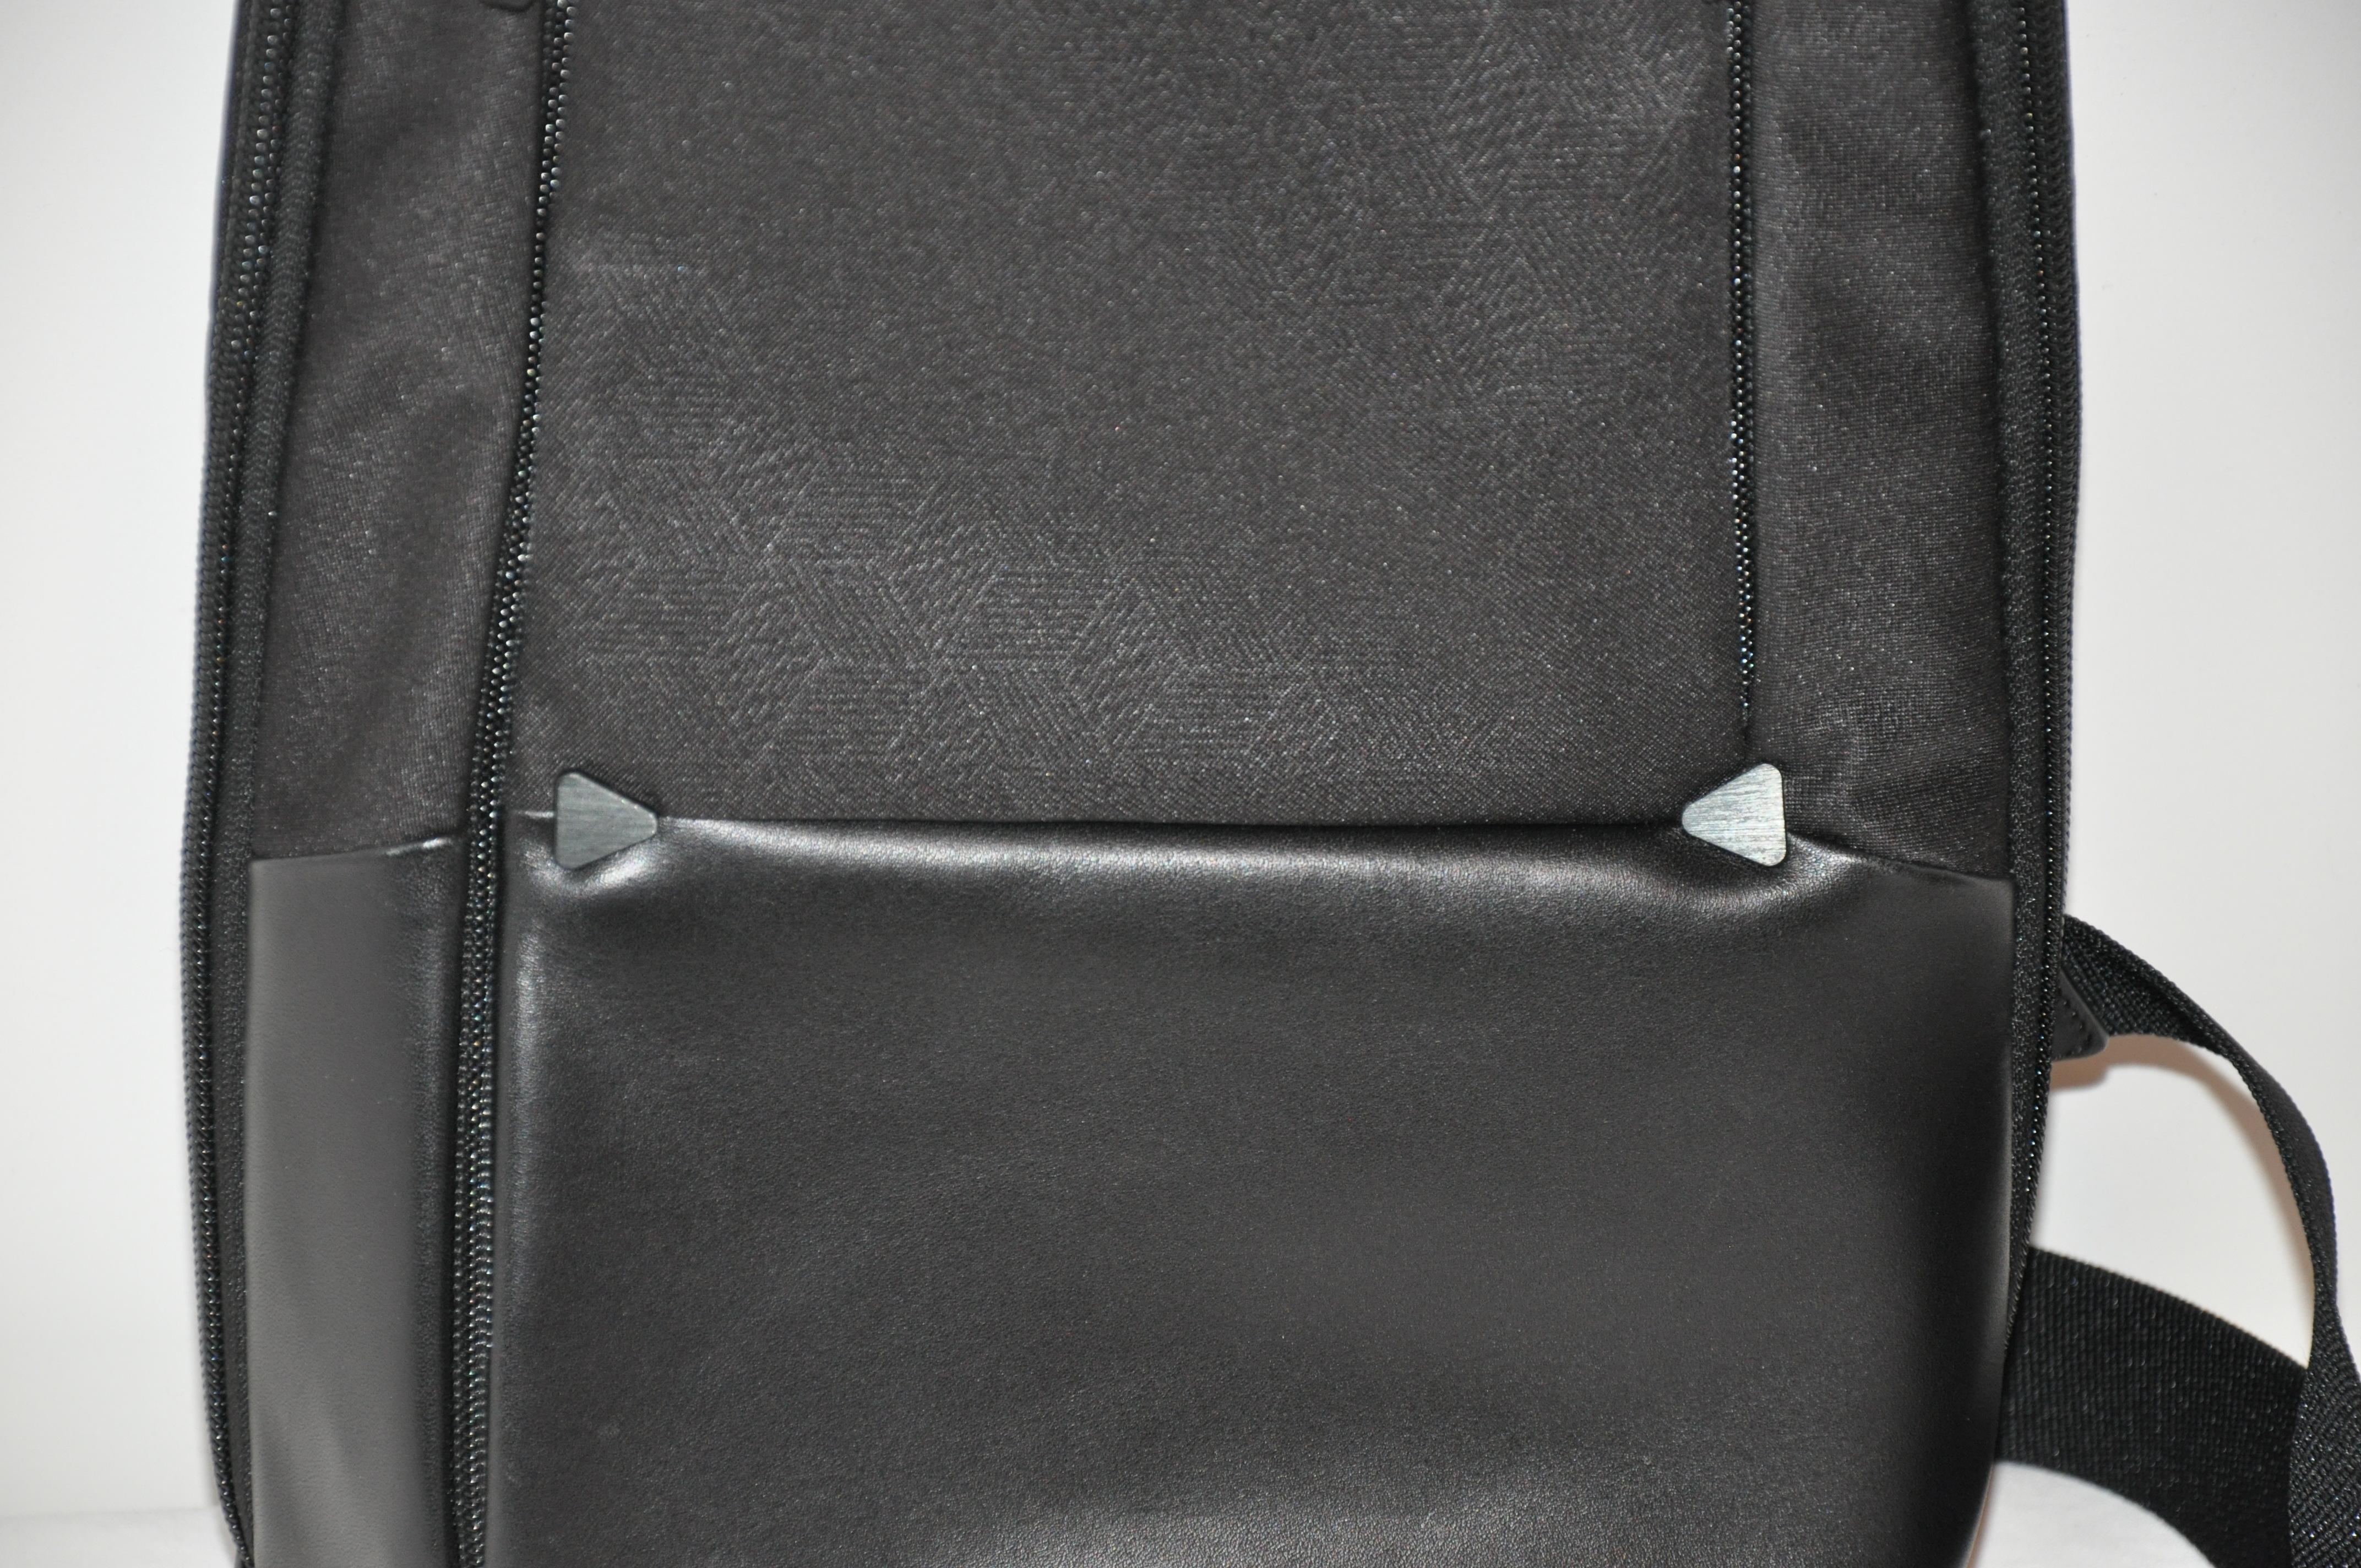 Tumi Black with Calfskin Accents 4 Zippered Compartments Crossbody Travel Bag In Good Condition For Sale In New York, NY